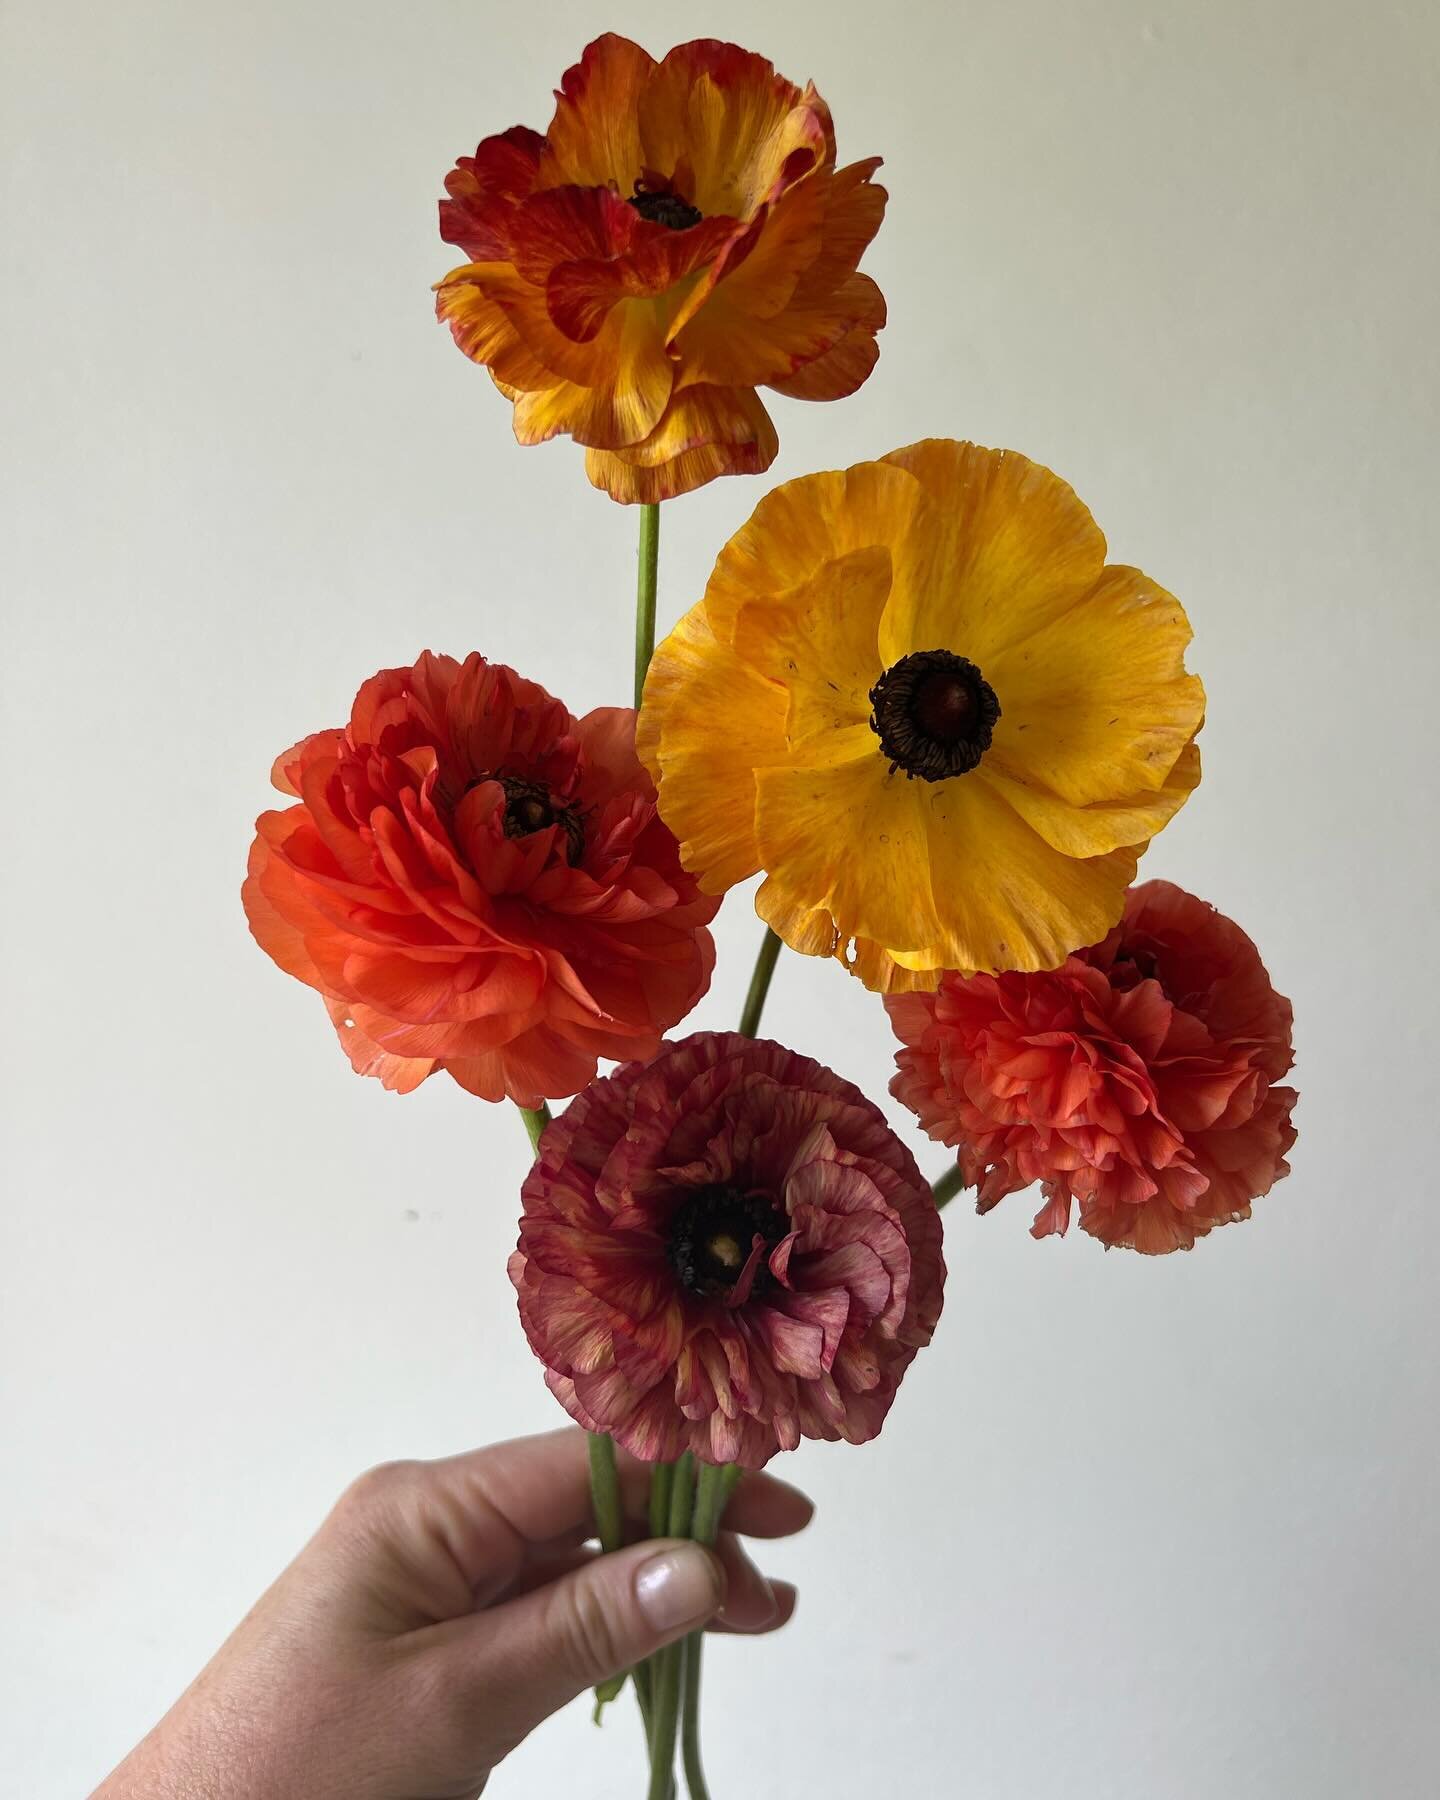 Last year at this time I was tending to a bunch of seed starts in my kitchen&hellip; wanting to give flower farming a go. It&rsquo;s all such a learning experience, with lots of trial and error. Growing flowers in large quantities takes so much time,